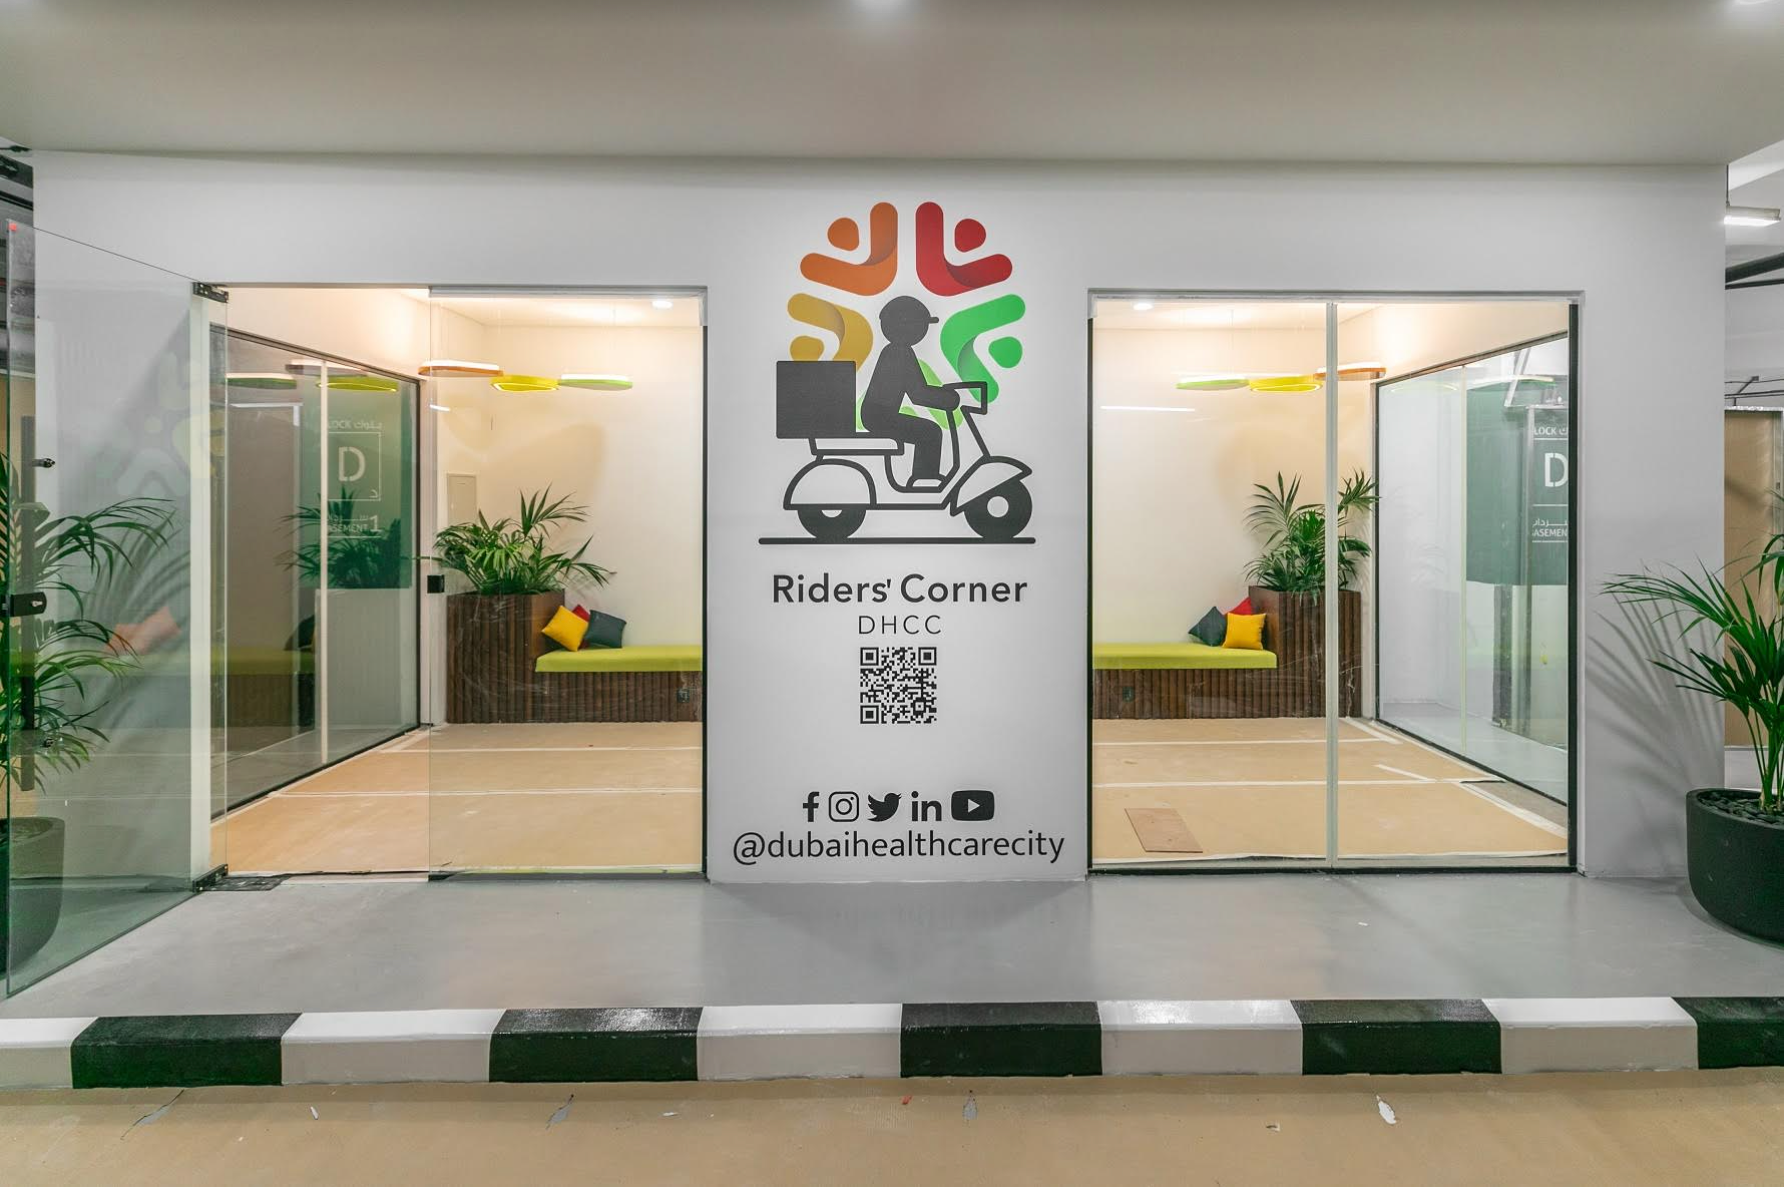 ‘RIDERS’ CORNER-DHCC’ OFFERS AIR-CONDITIONED SPACE AND COMPLIMENTARY HEALTH CHECK-UPS FOR DELIVERY RIDERS